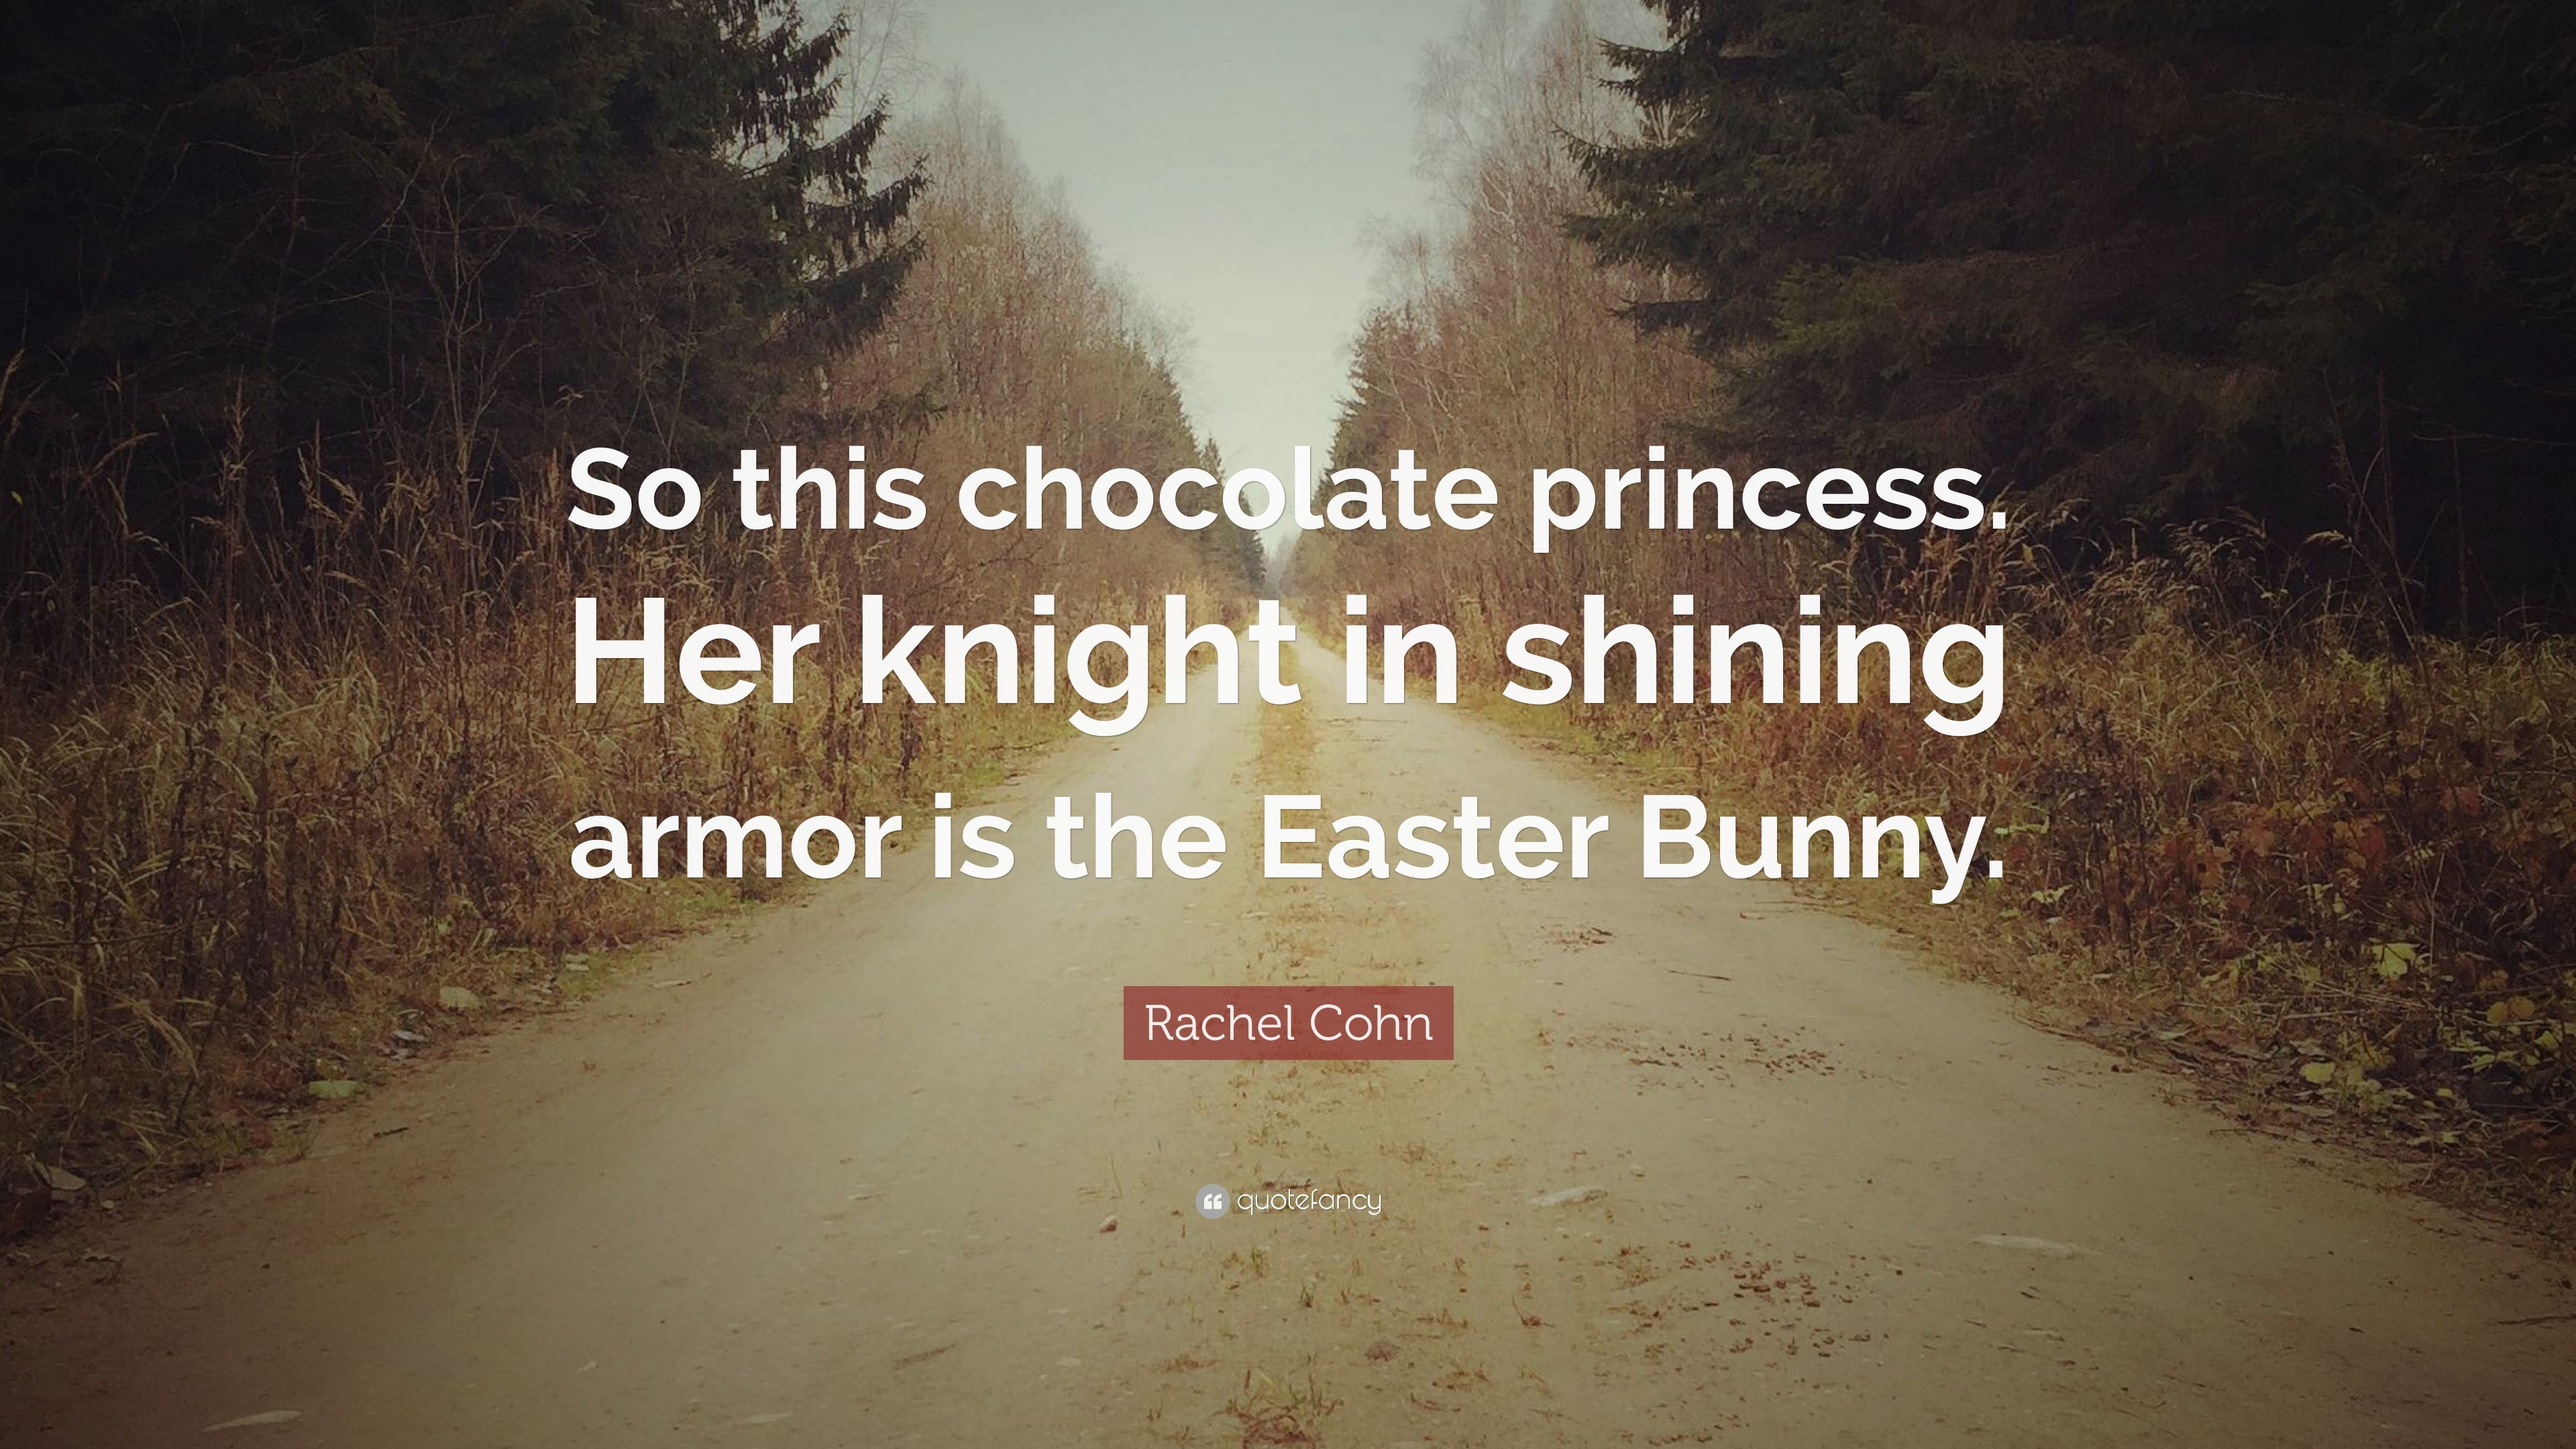 Rachel Cohn Quote: “So this chocolate princess. Her knight